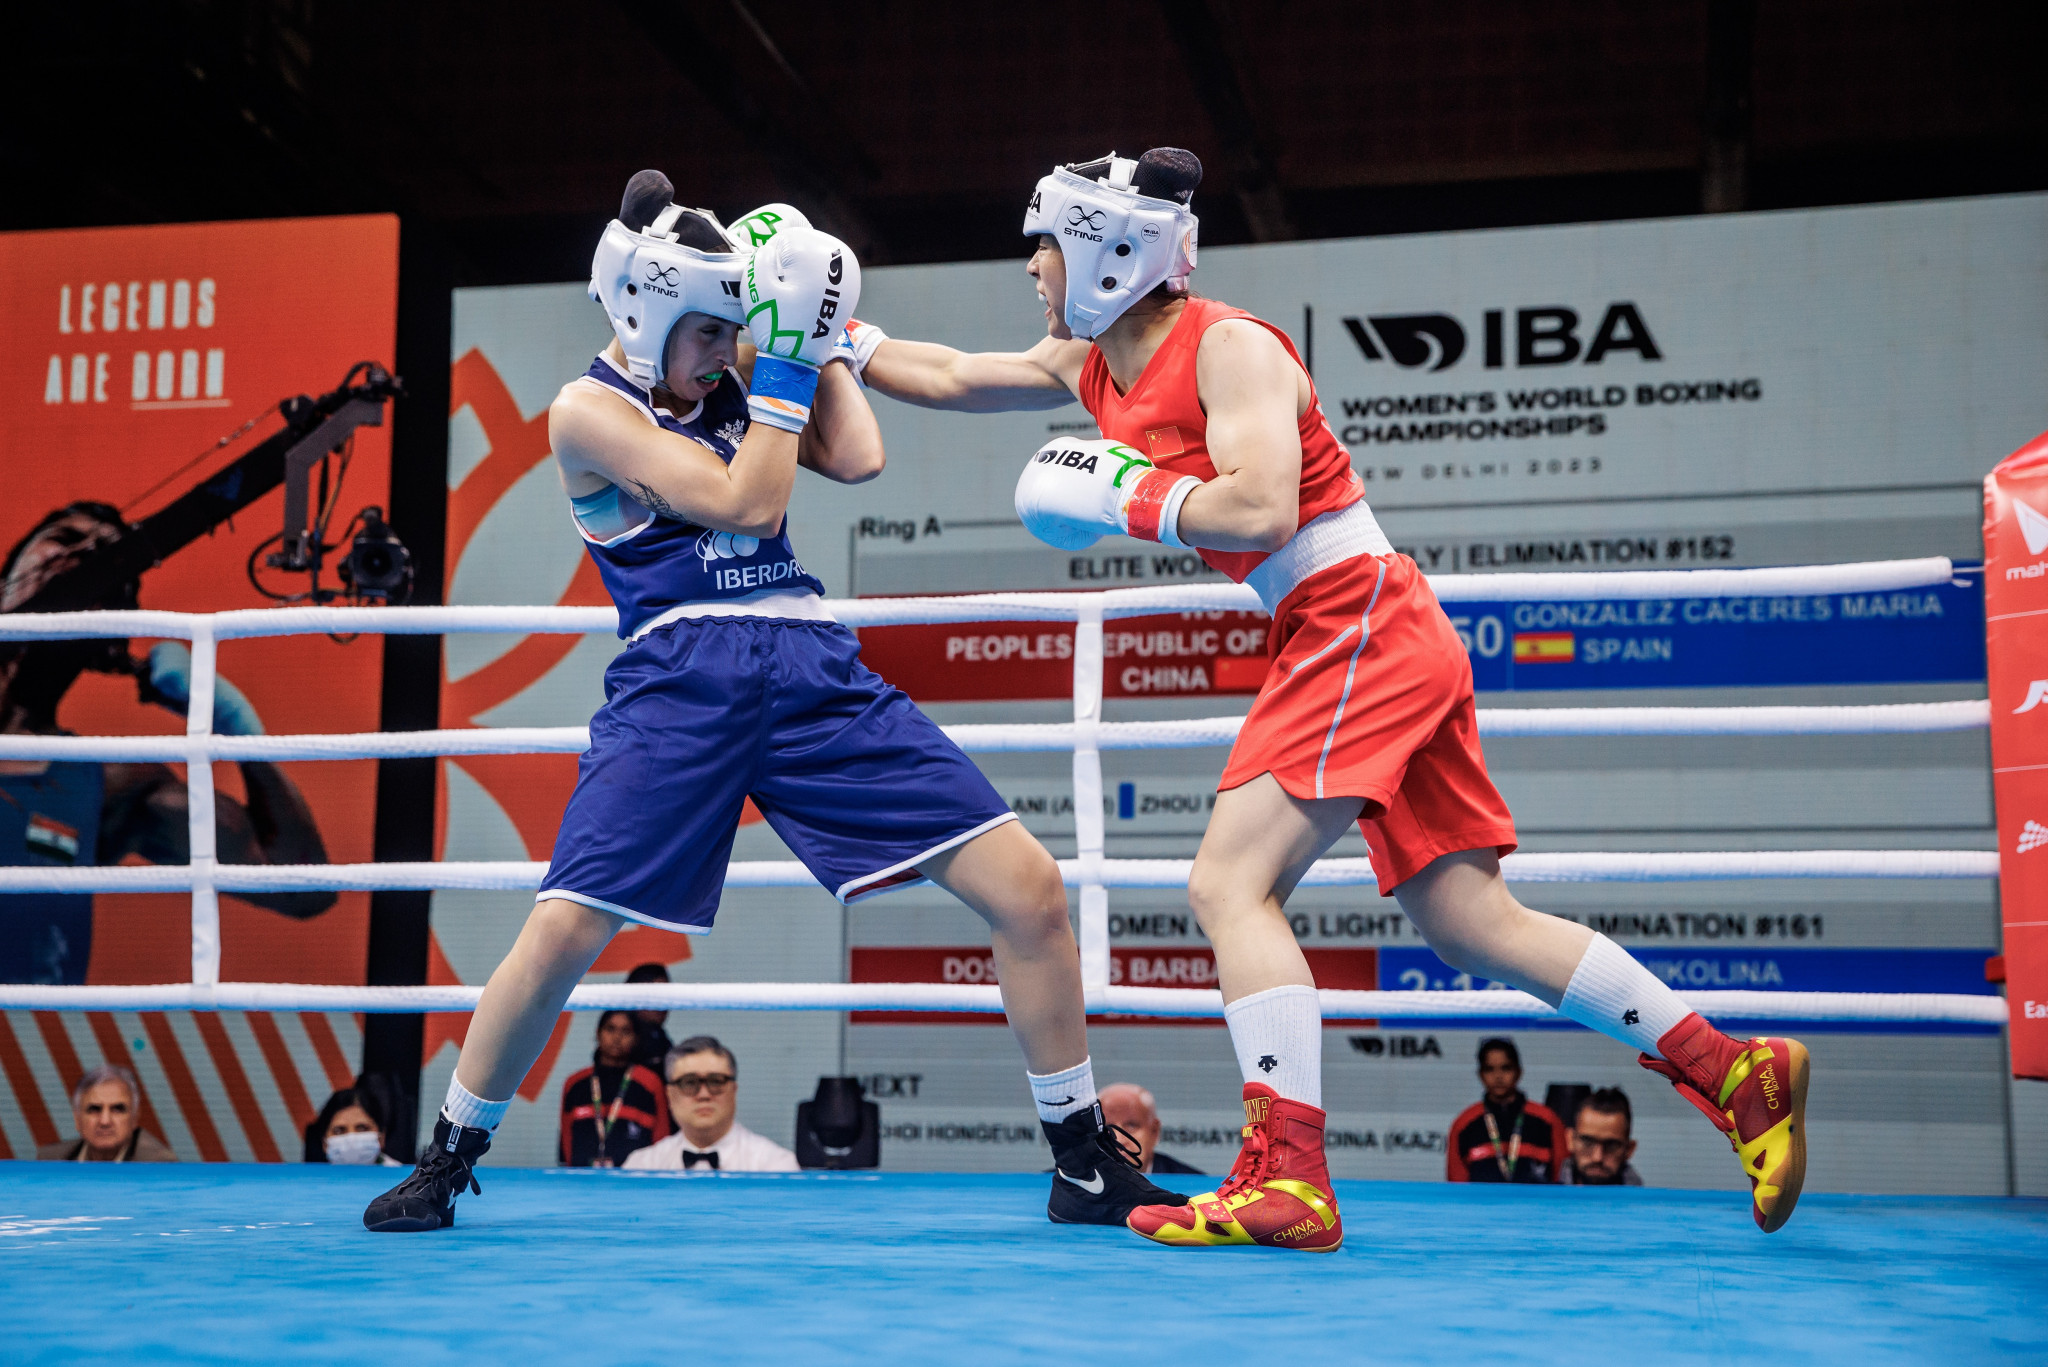 China's Wu Yu, right, saw off higher-ranked Maria Caceres Gonzalez of Spain in the flyweight division ©IBA